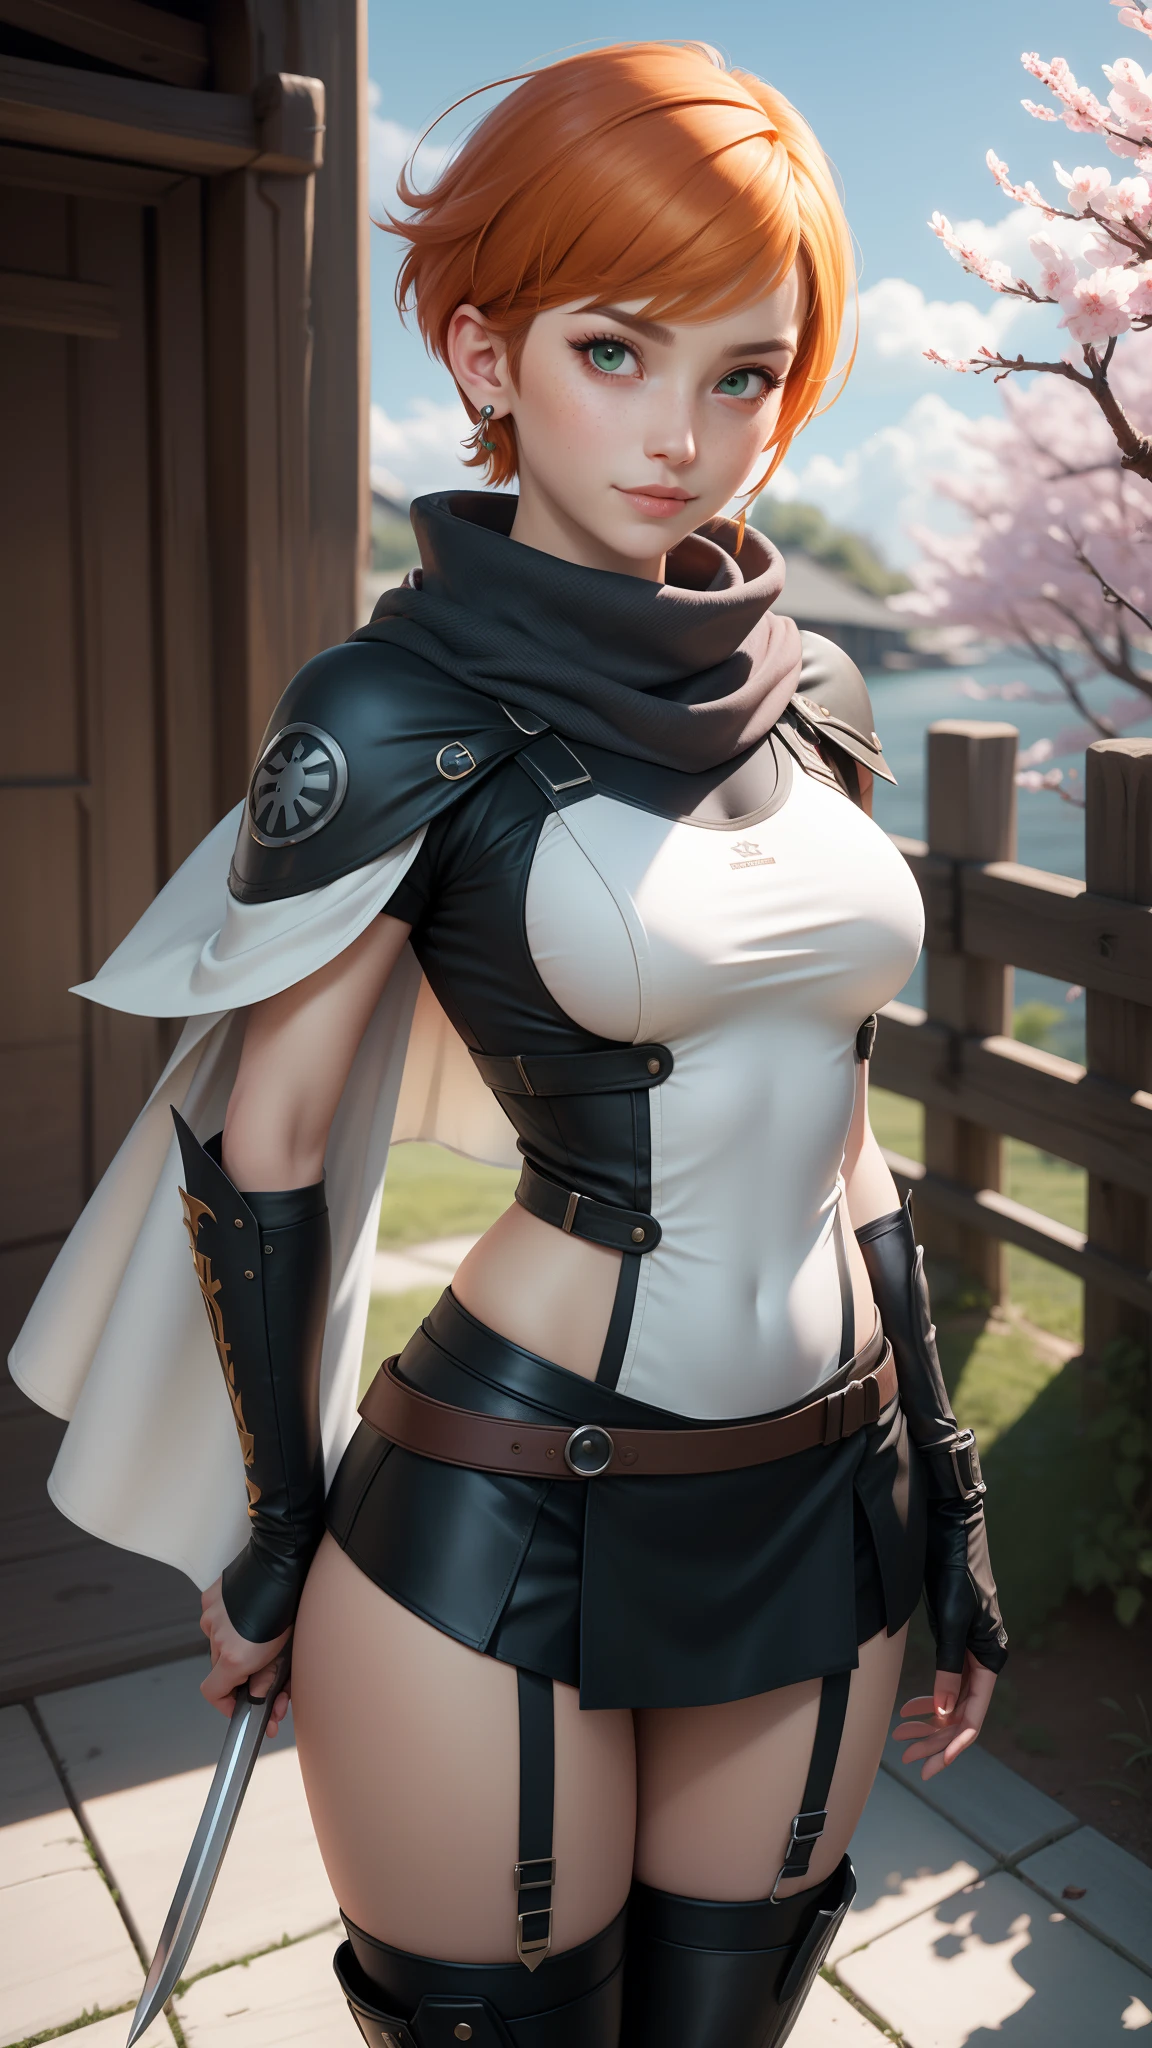 gwen tennyson,tracer,yorha 2b,rebecca chambers,samurai outfit,japan,steel armor,teenager,green eyes,garter belt, thigh high boots,short hair,orange hair,moonlight,cherry blossom,shy smile,white striped top,bodycon skirt, kimono,freckles,redhead,beautiful girl,large breasts,ultra detailed,realistic, ninja scarf,short ninja cape,holding a spear,small earrings,river,striped panties,